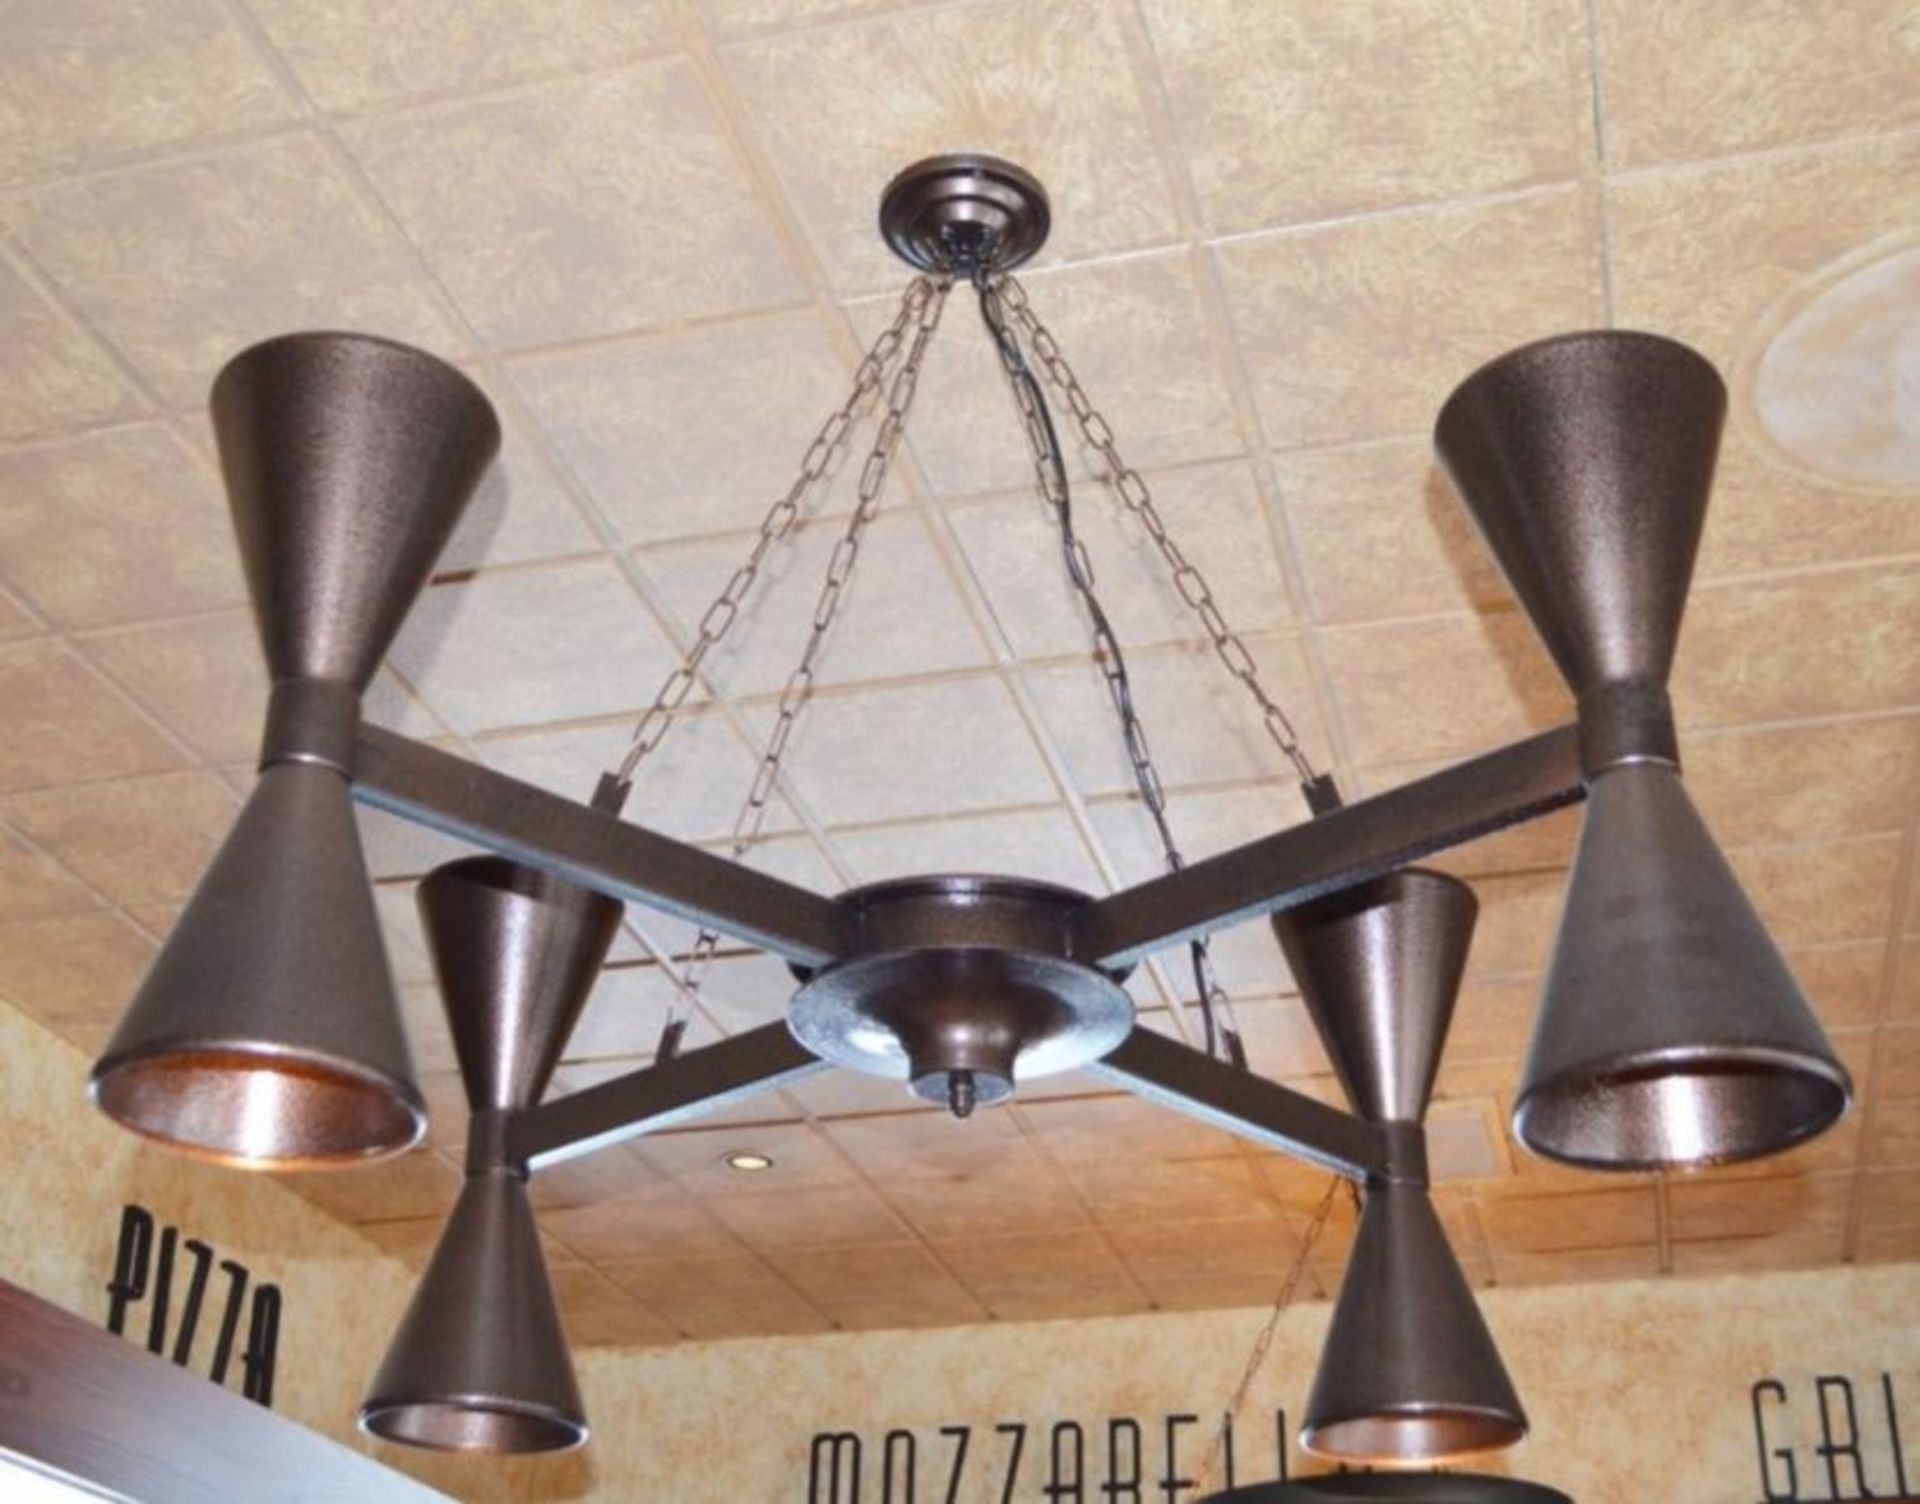 2 x Impressive 4 Arm Chandelier Light Fittings With Brown Pitted Finish